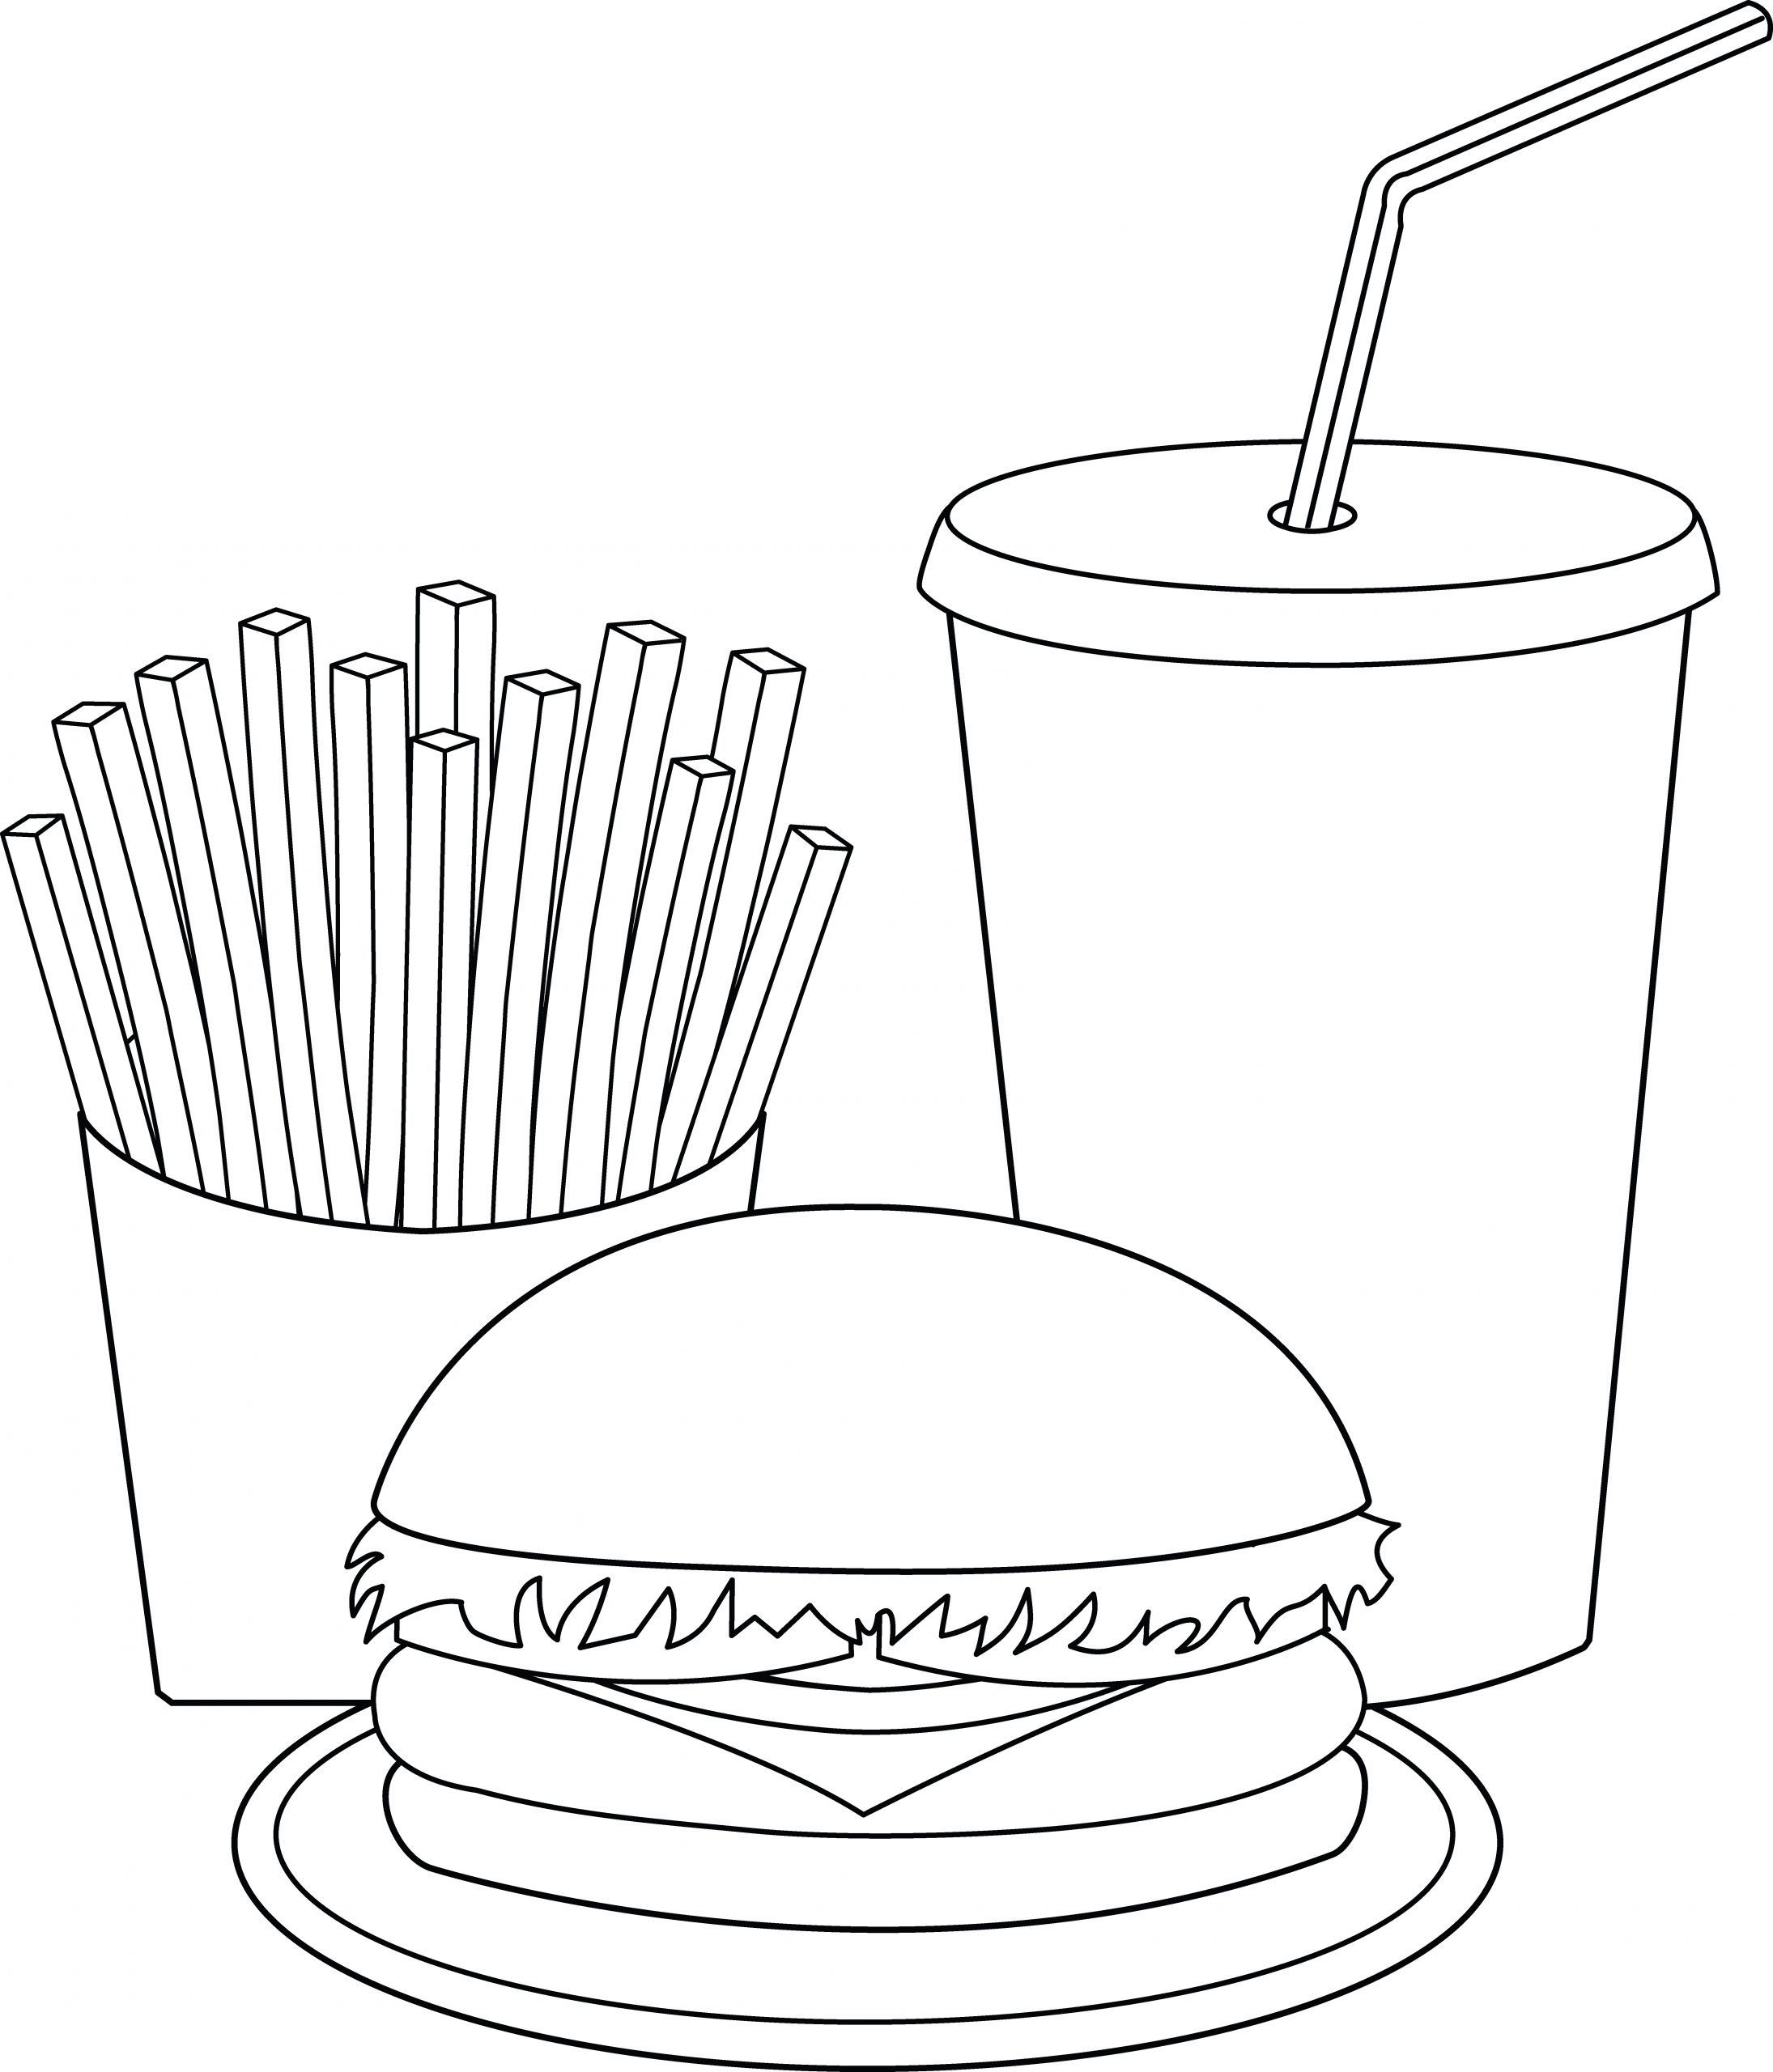 Hamburger Coloring Pages   Best Coloring Pages For Kids